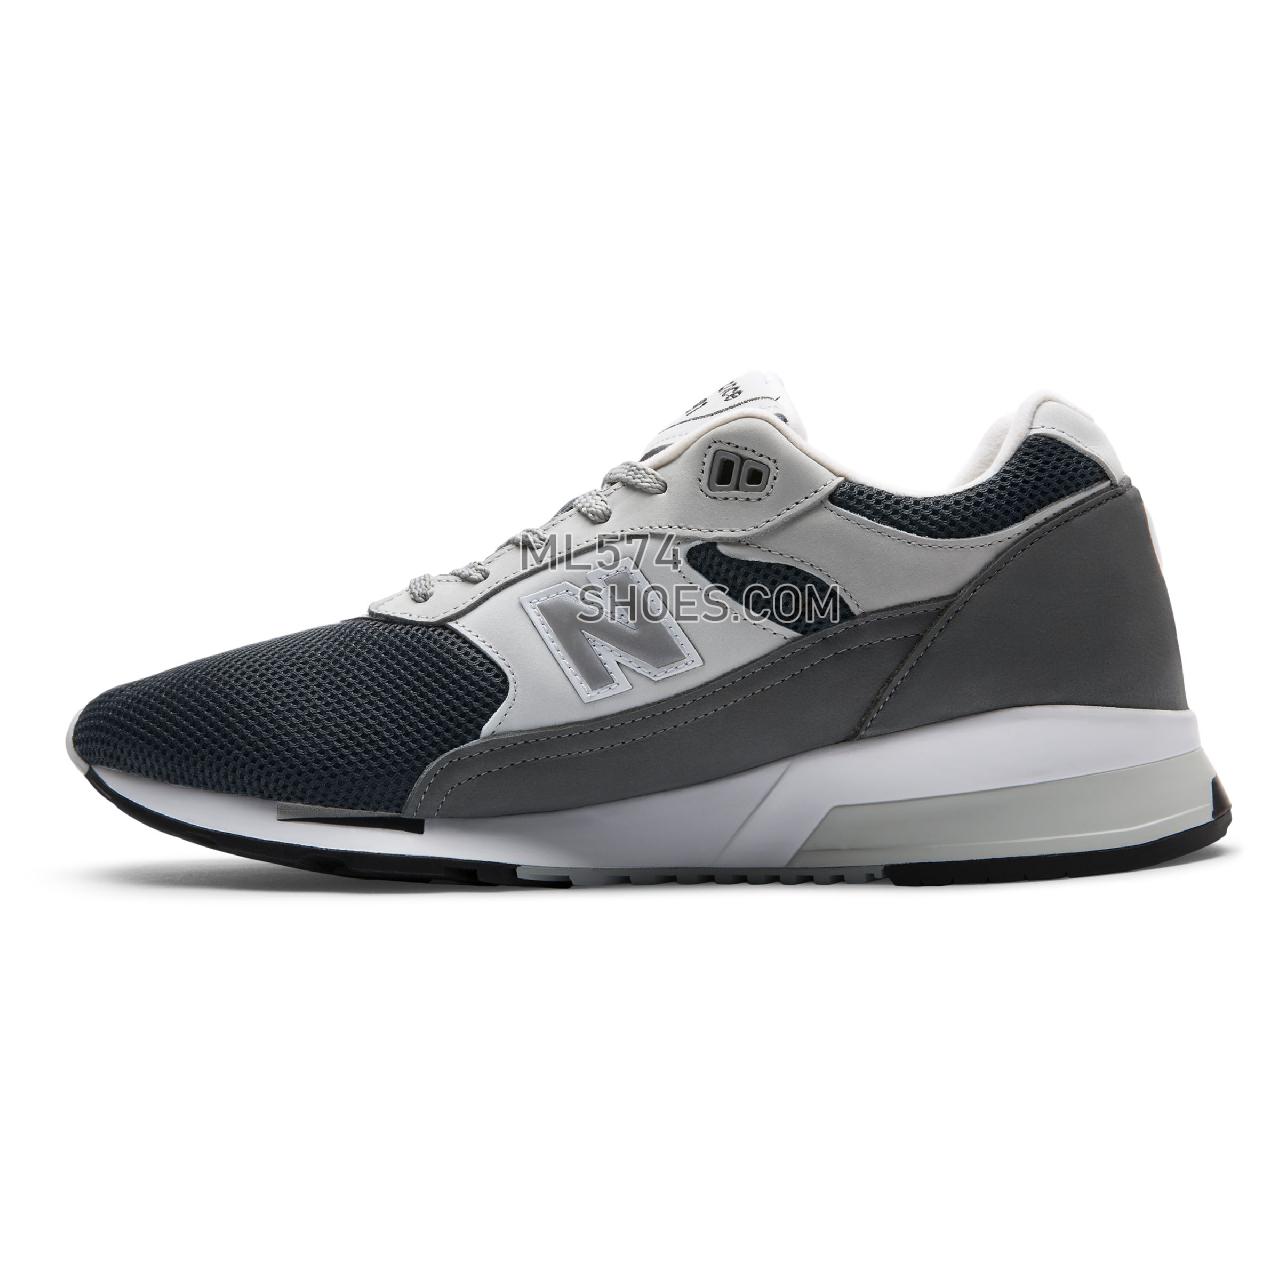 New Balance Made in UK 1991 - Men's 1991 - Classic Charcoal with Black - M1991XG